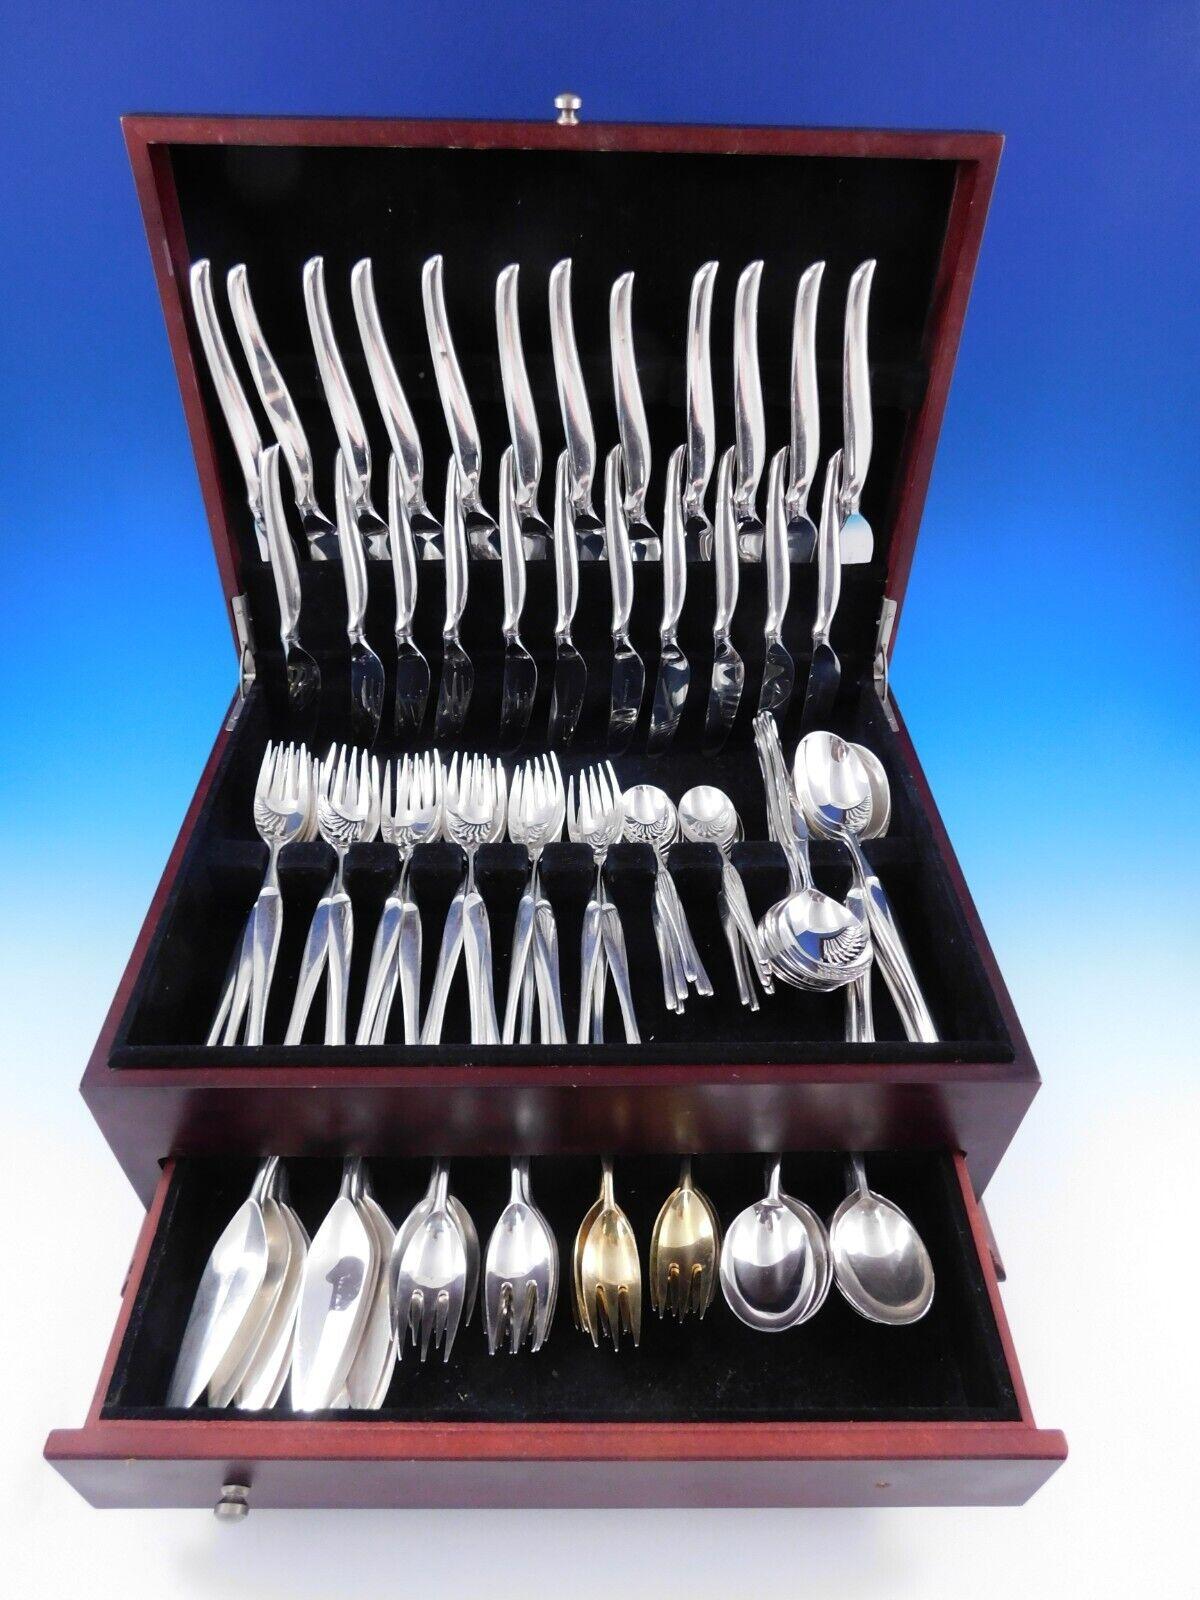 With a dedication to perfection and quality, Christofle flatware creations unite craftsmanship and modern technique, resulting in flatware to be handed down through generations. 

Duo aka Silver Wing by Christofle France estate Silverplate Flatware